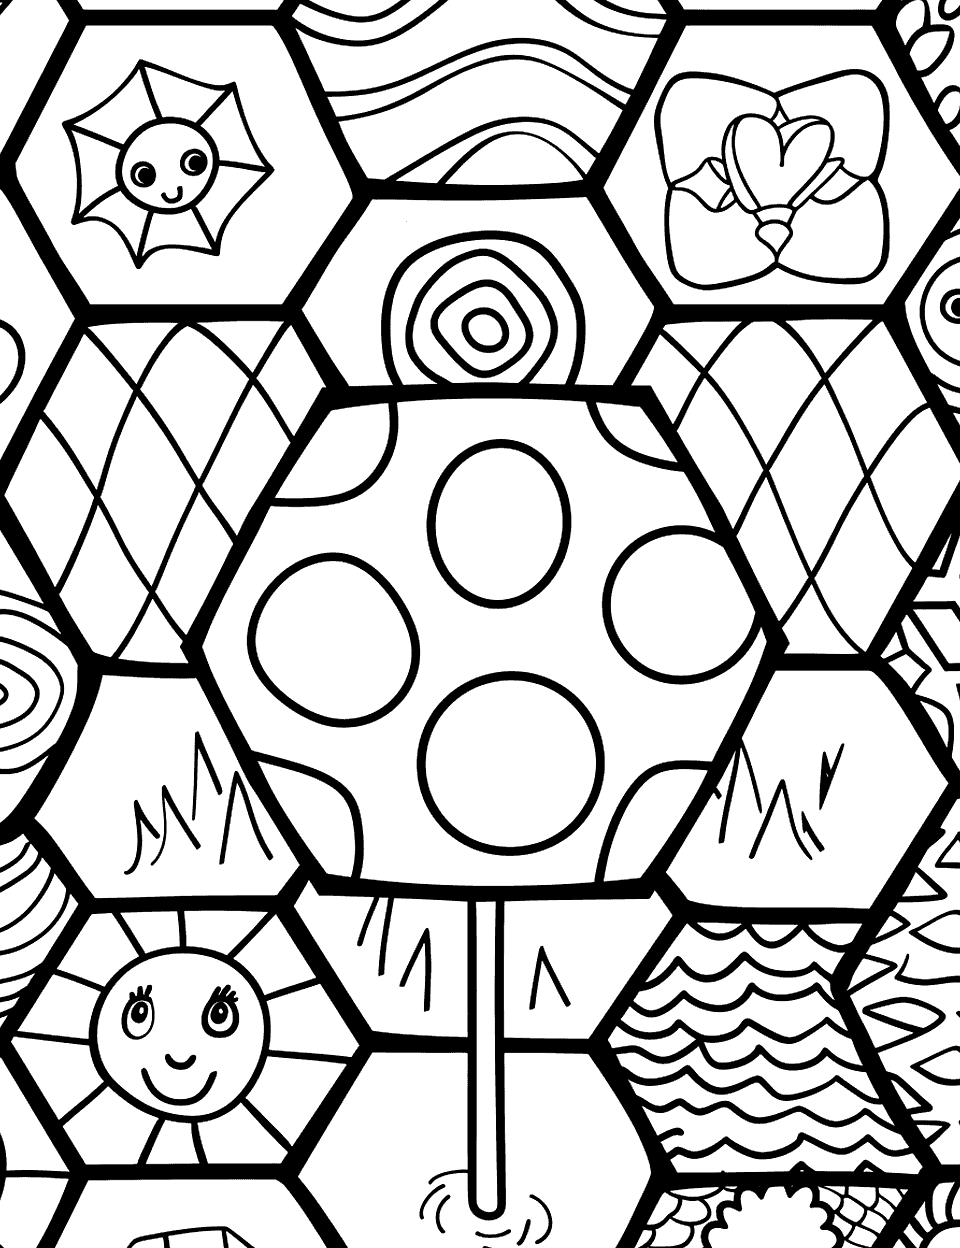 Cool Hexagon Patterns Shapes Coloring Page - A page filled with hexagons arranged in a honeycomb pattern, each with unique designs inside.